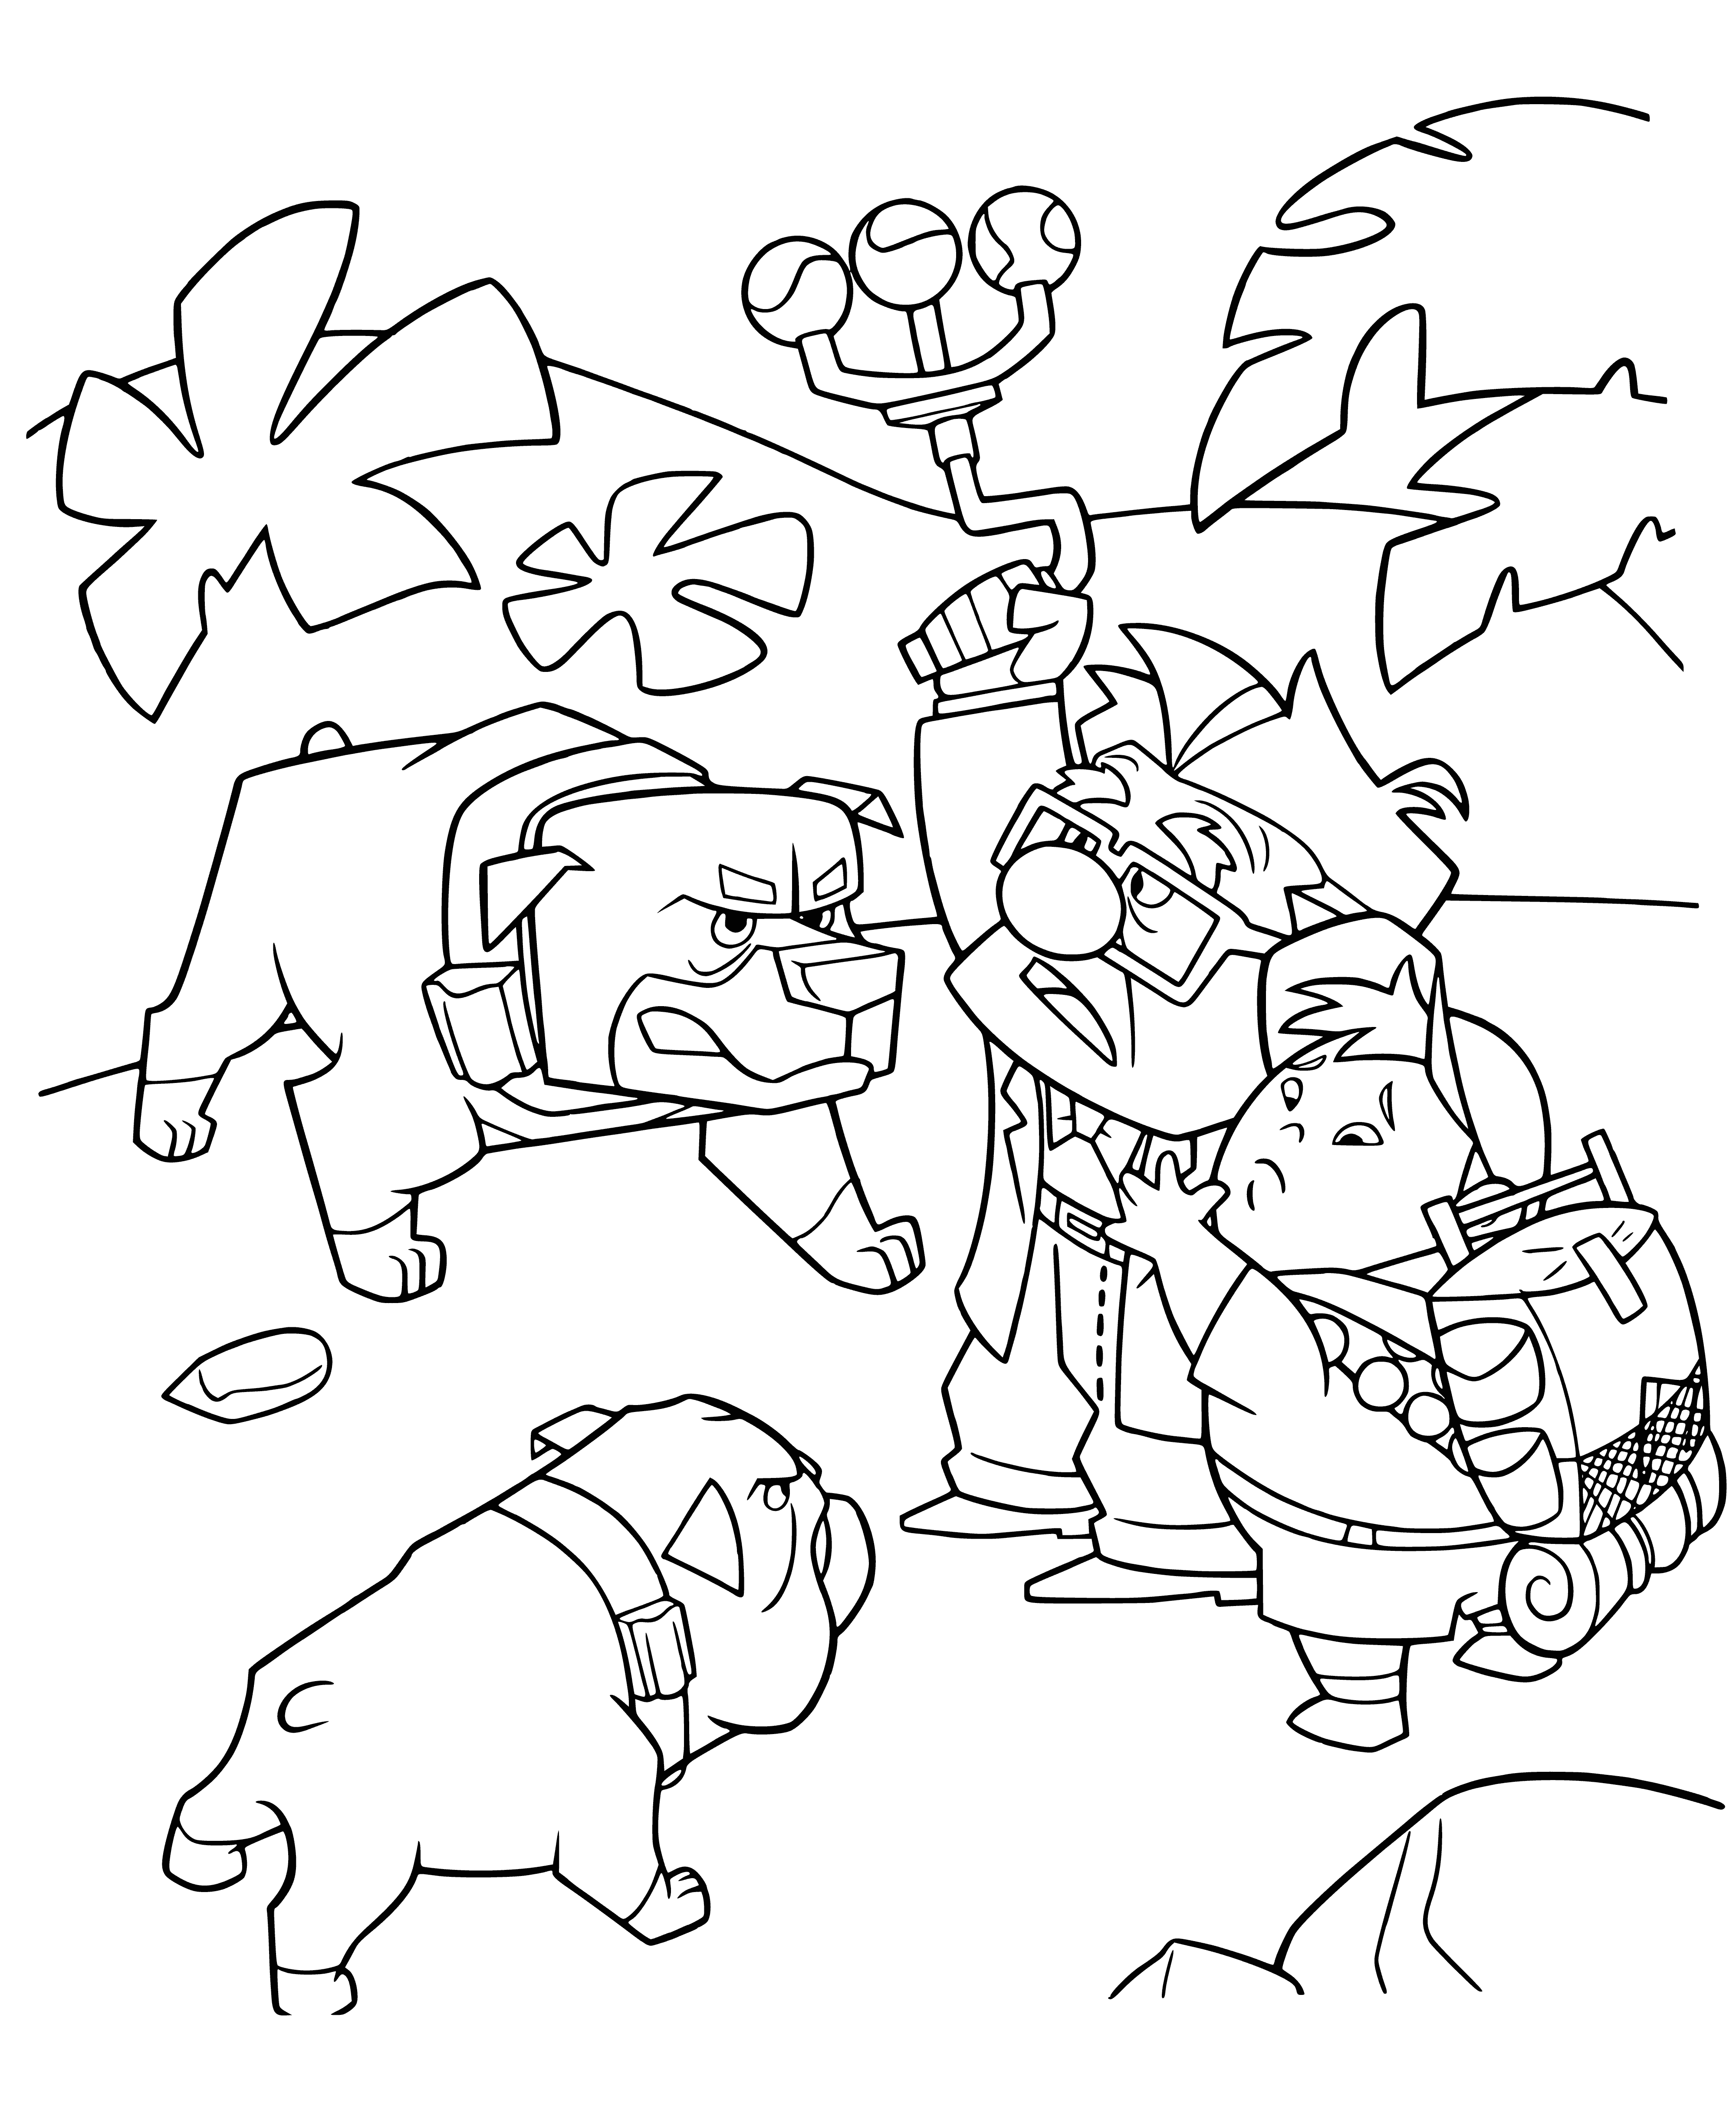 coloring page: Dogs circle up, facing center but nothing there – what could they be waiting for?